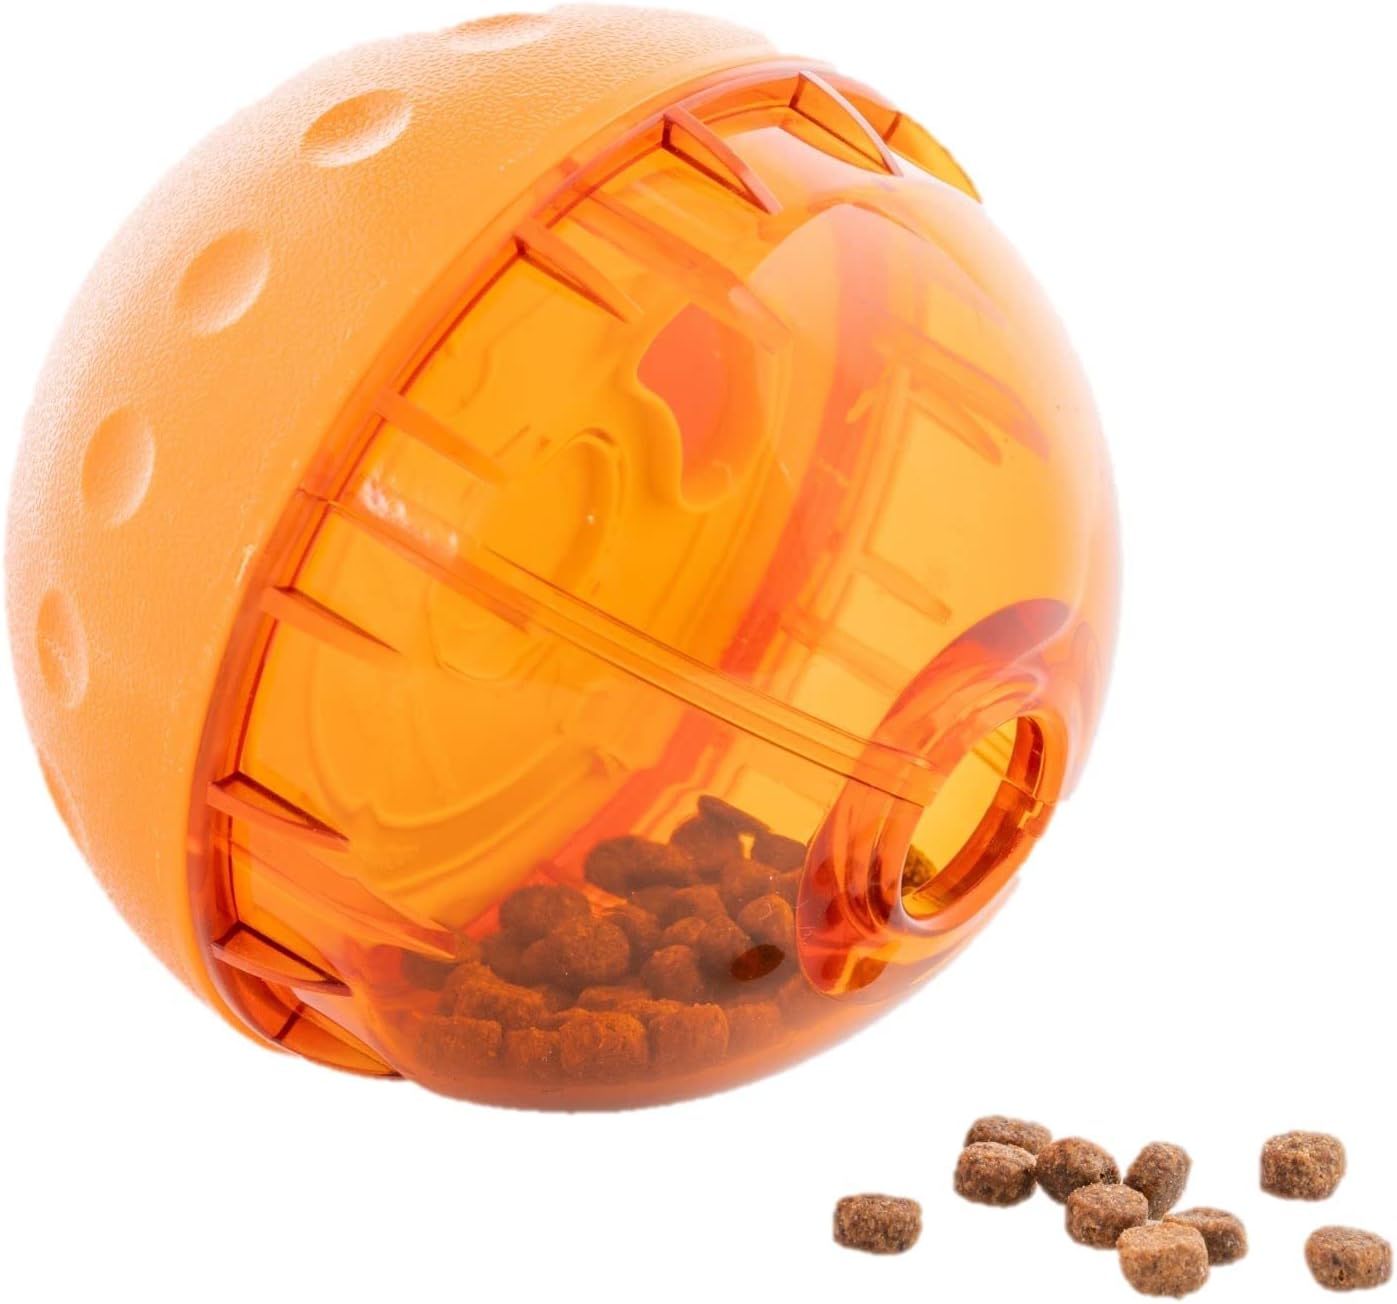 OurPets IQ Treat Ball Interactive Food Dispensing Toy